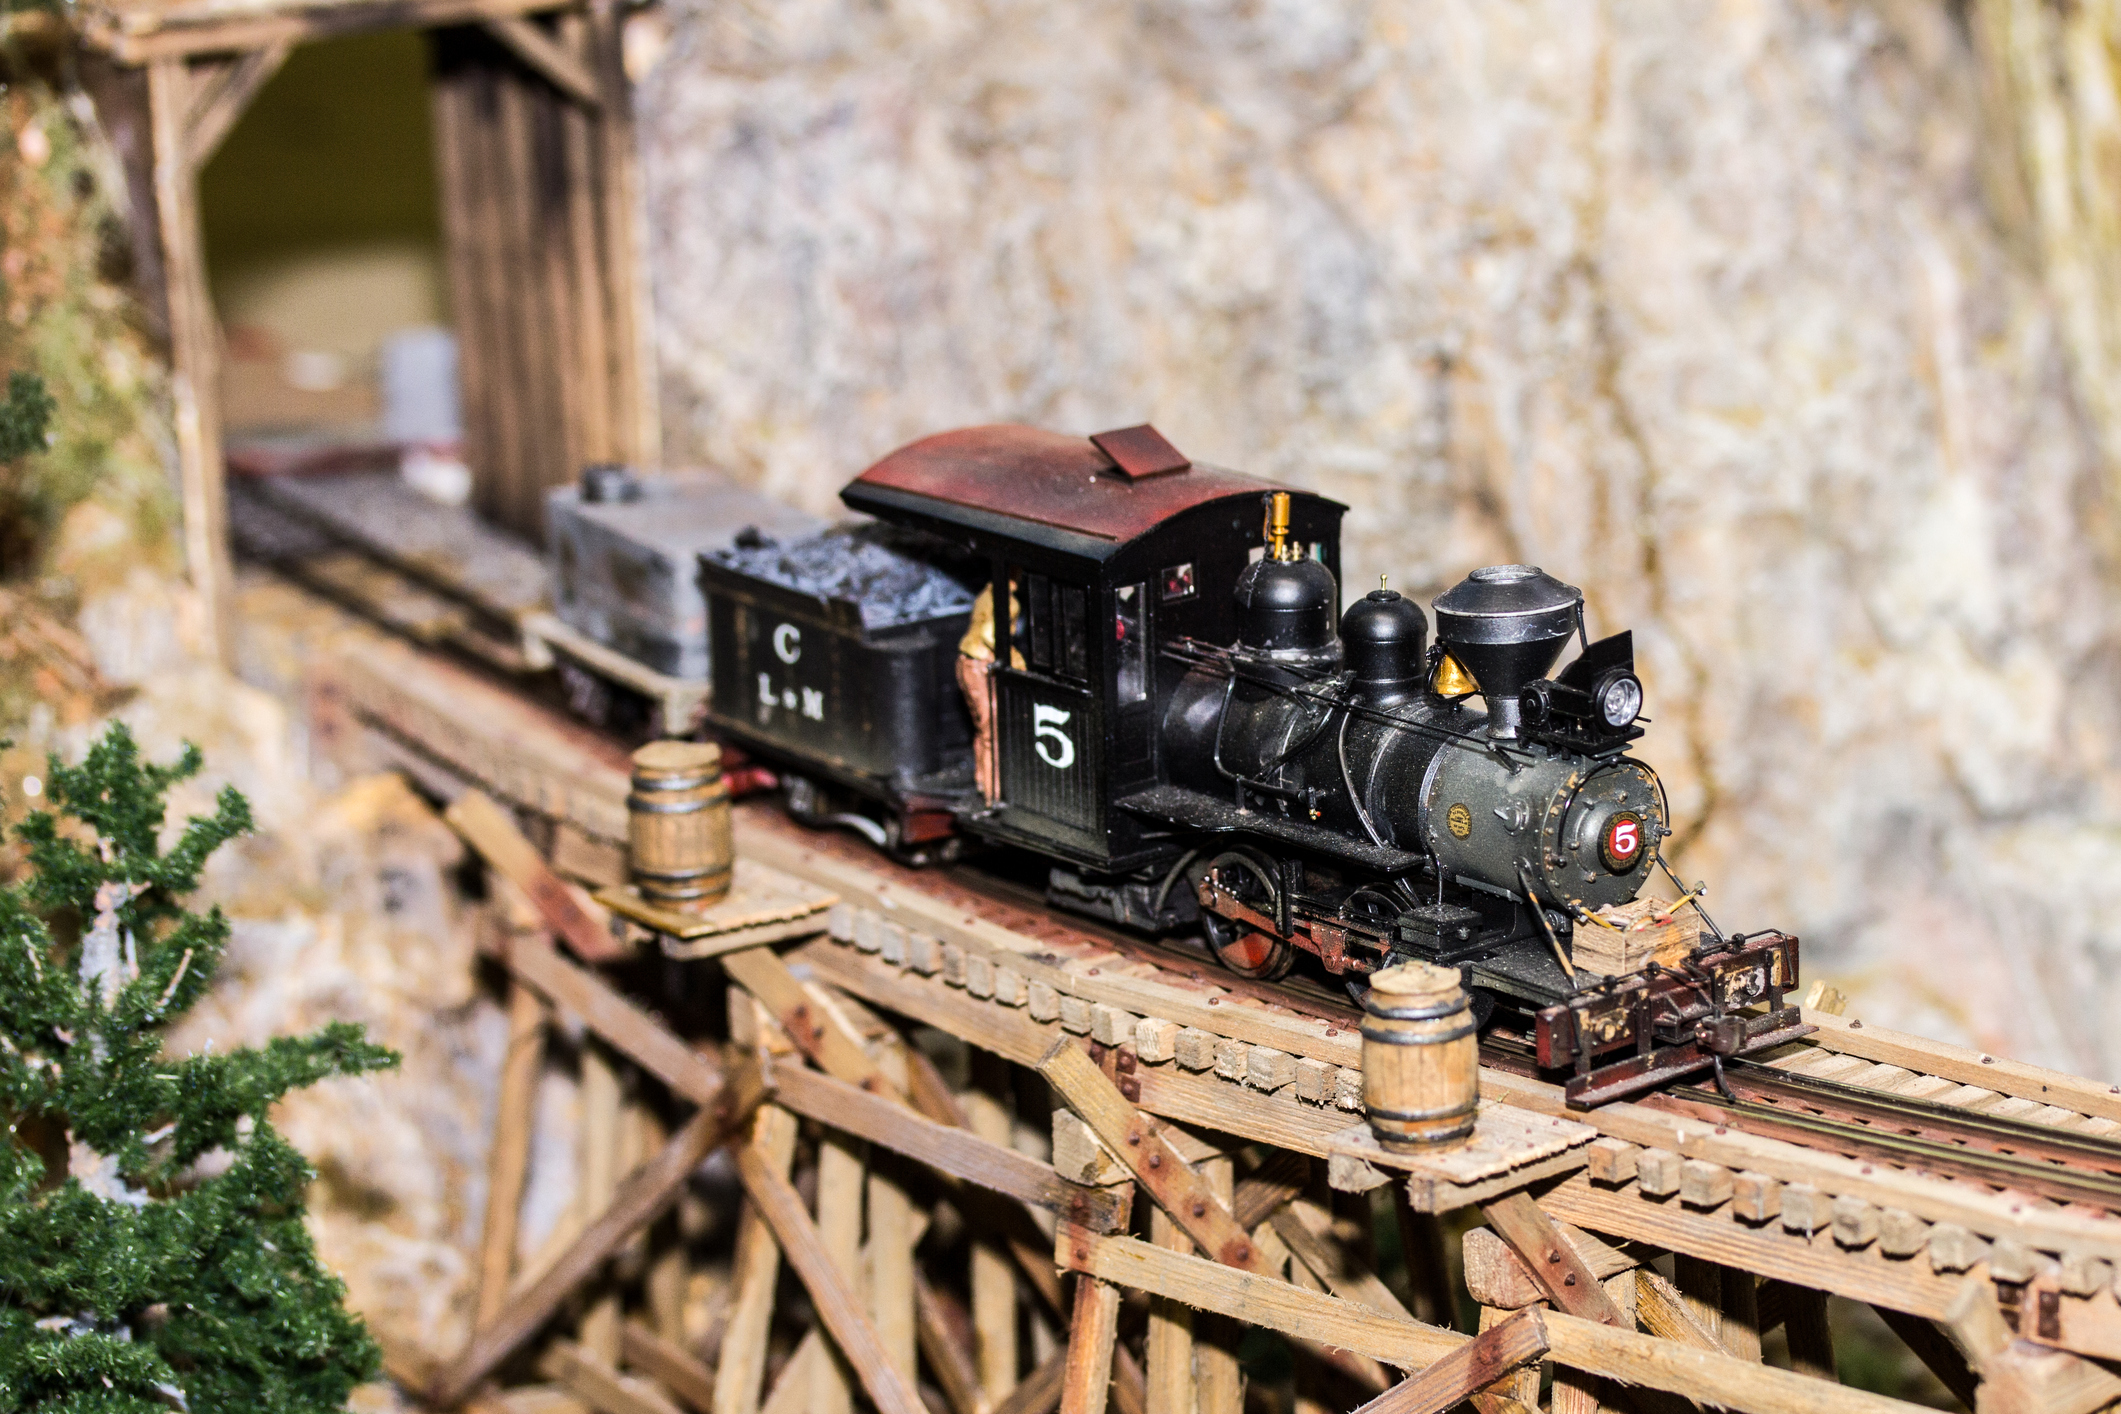 Three of the Rarest Model Trains Miles Financial